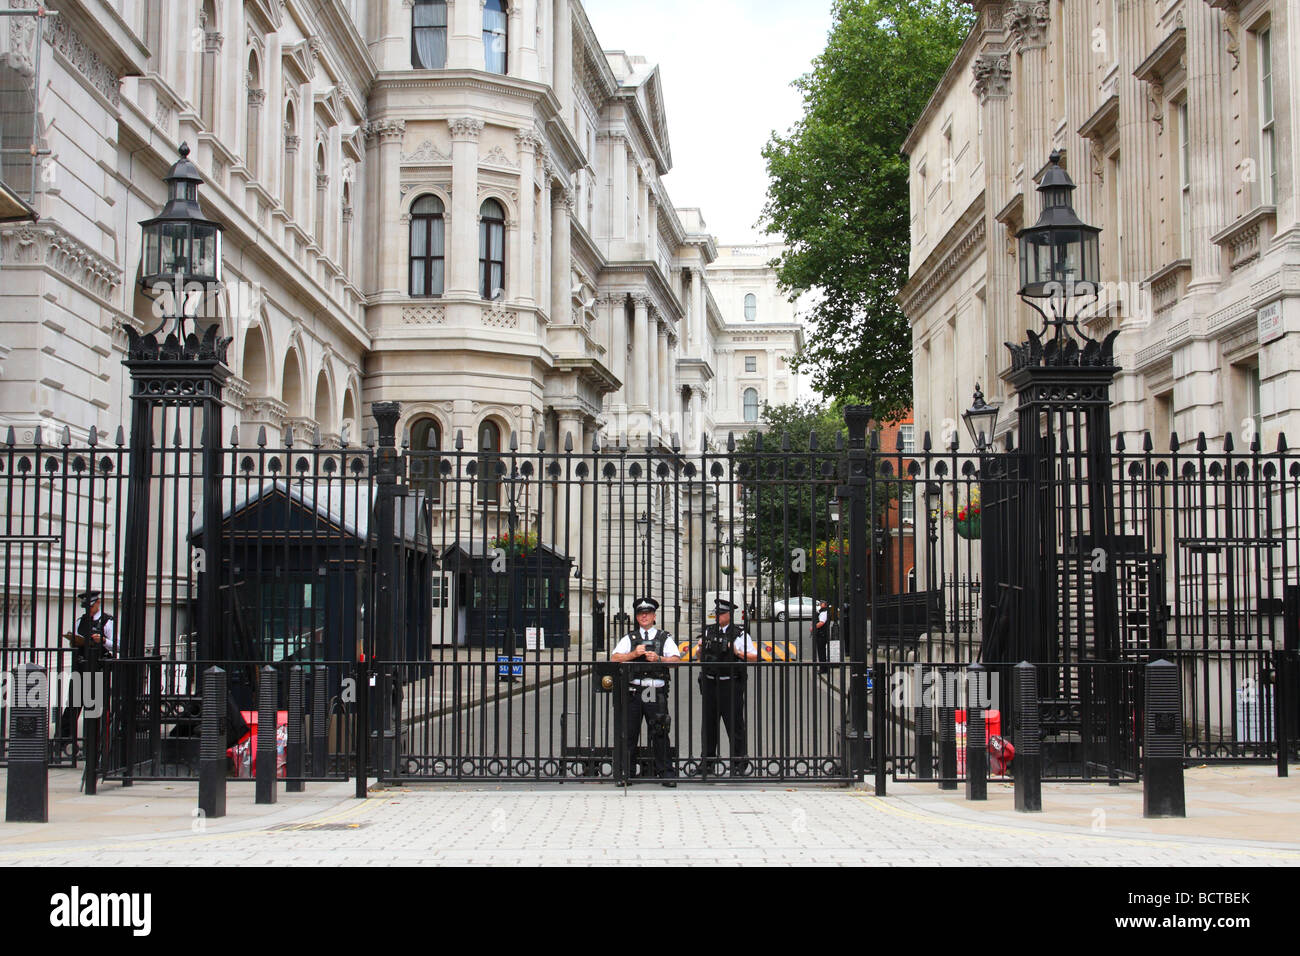 A Downing Street, Westminster, London, England, Regno Unito Foto Stock